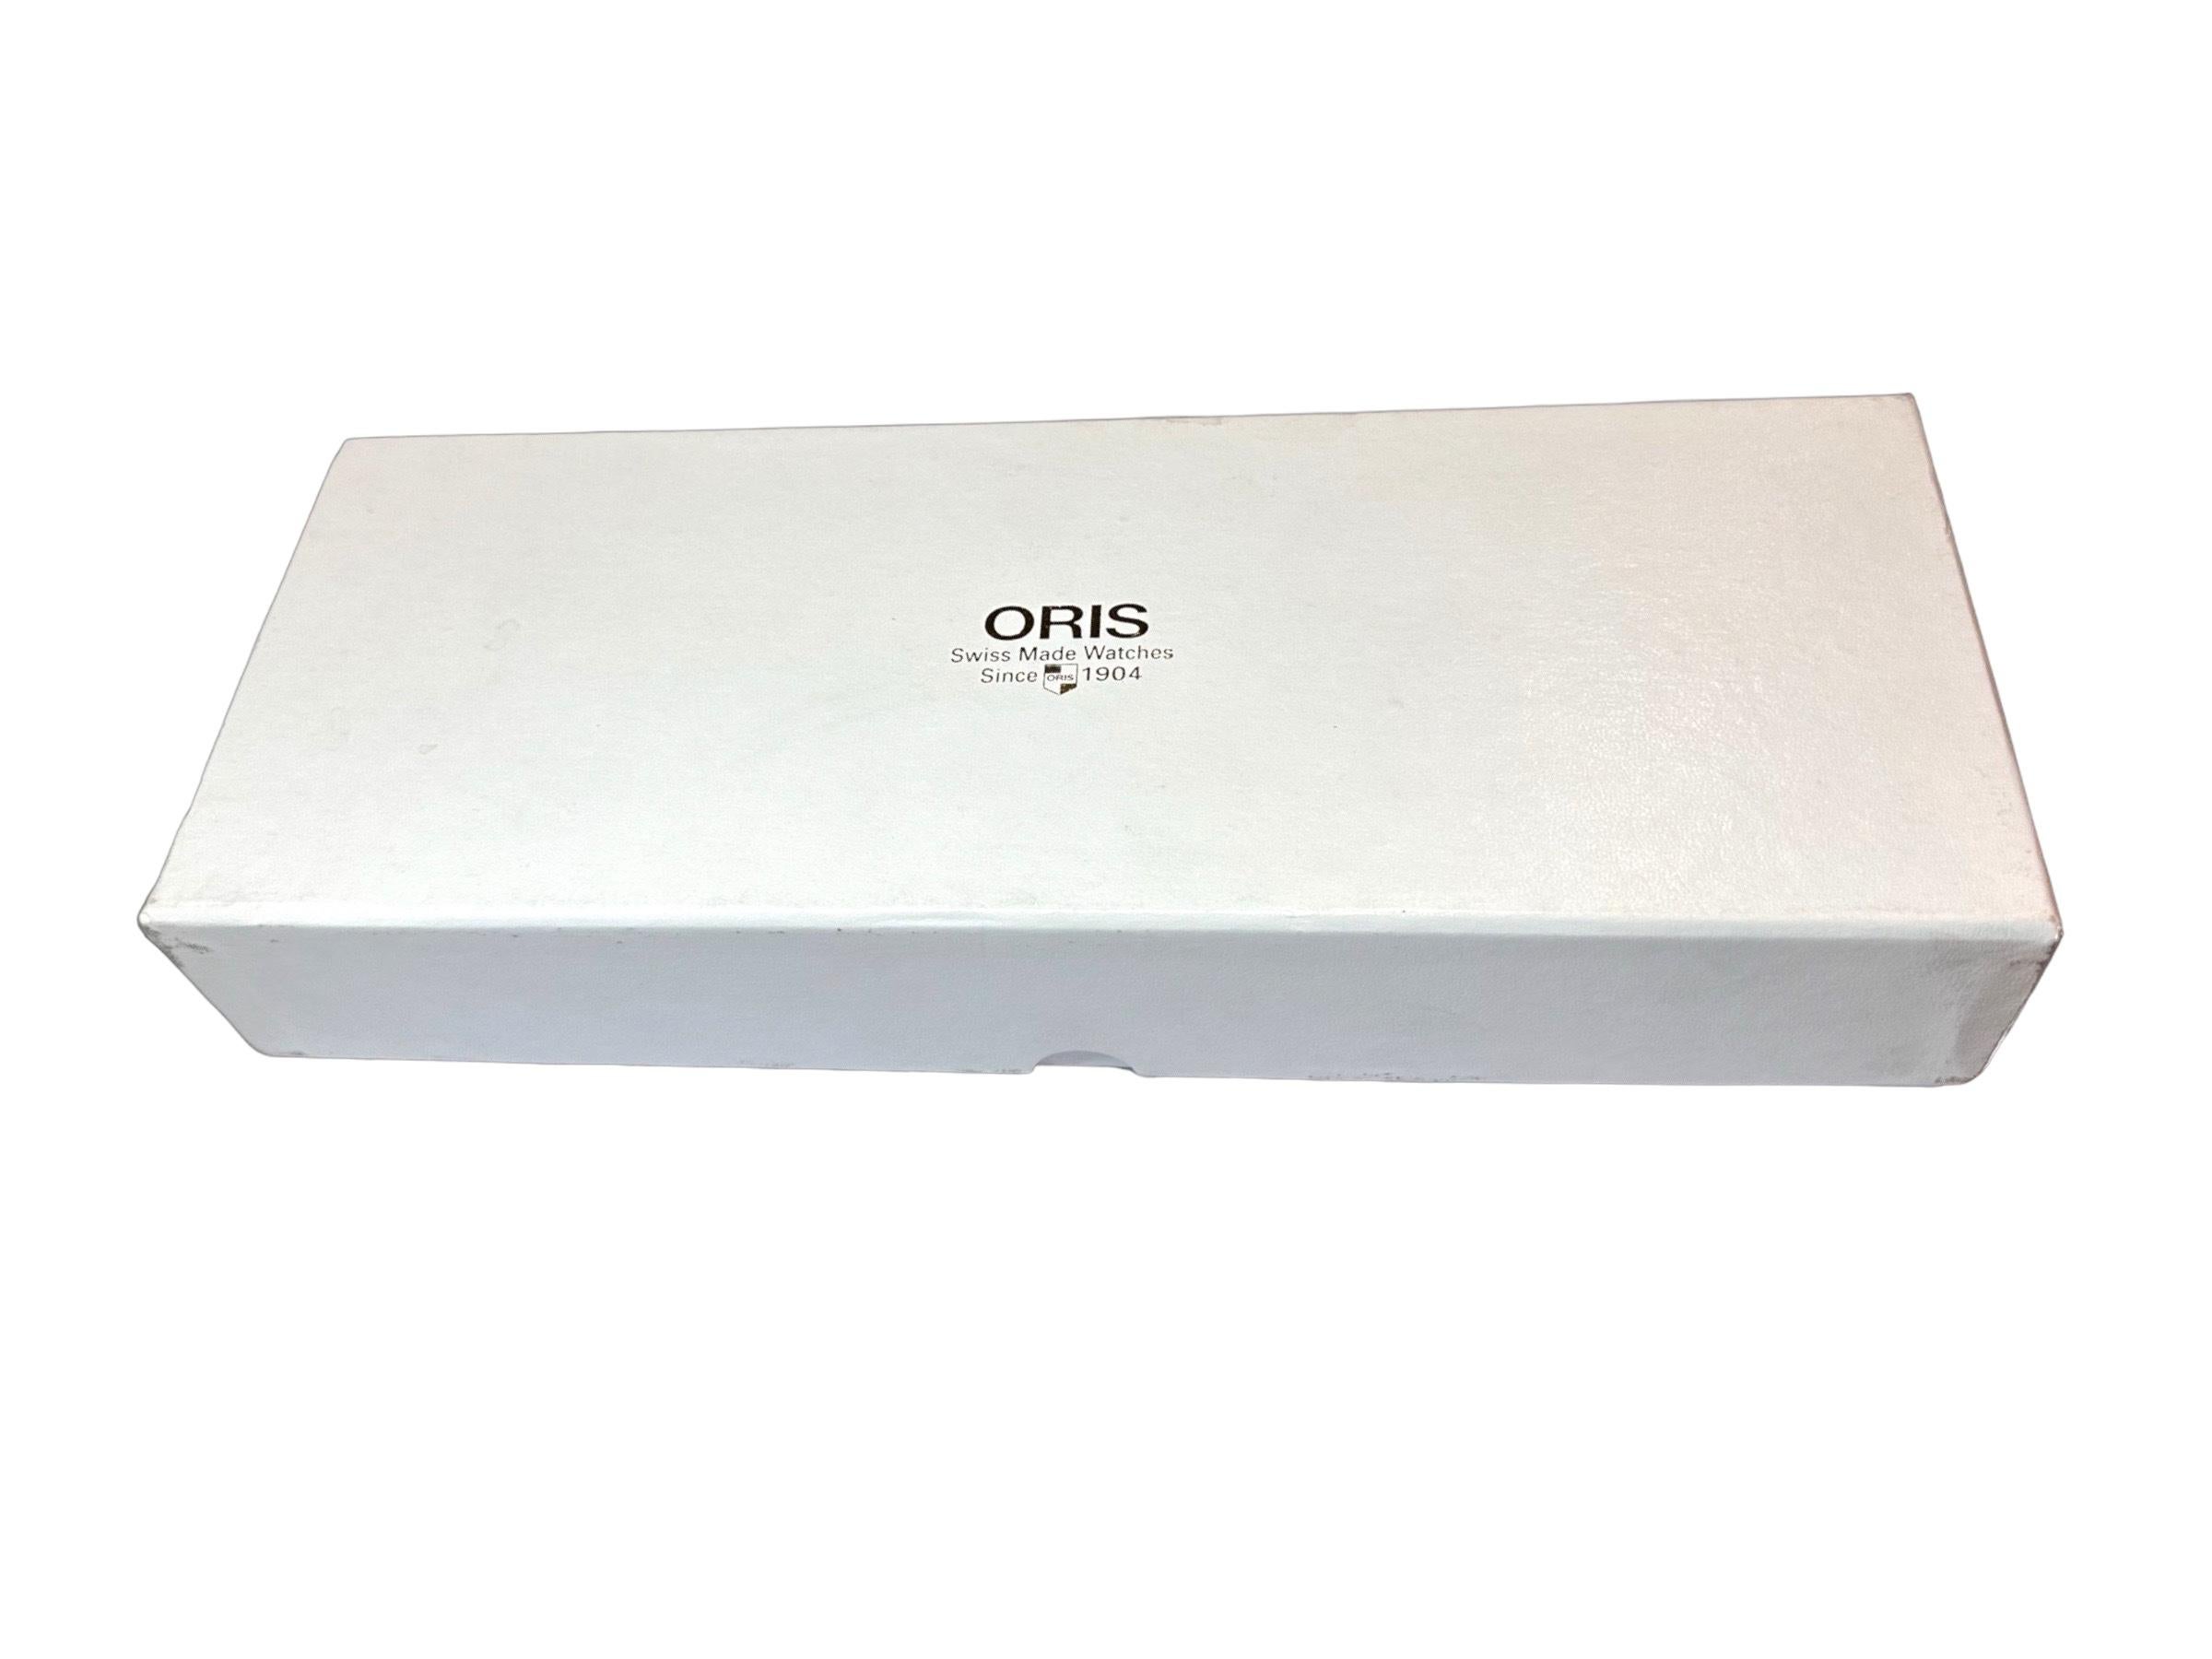 Oris Reveil Limited Edition Mechanical Alarm 18kt Gold, New with Box & Papers For Sale 6